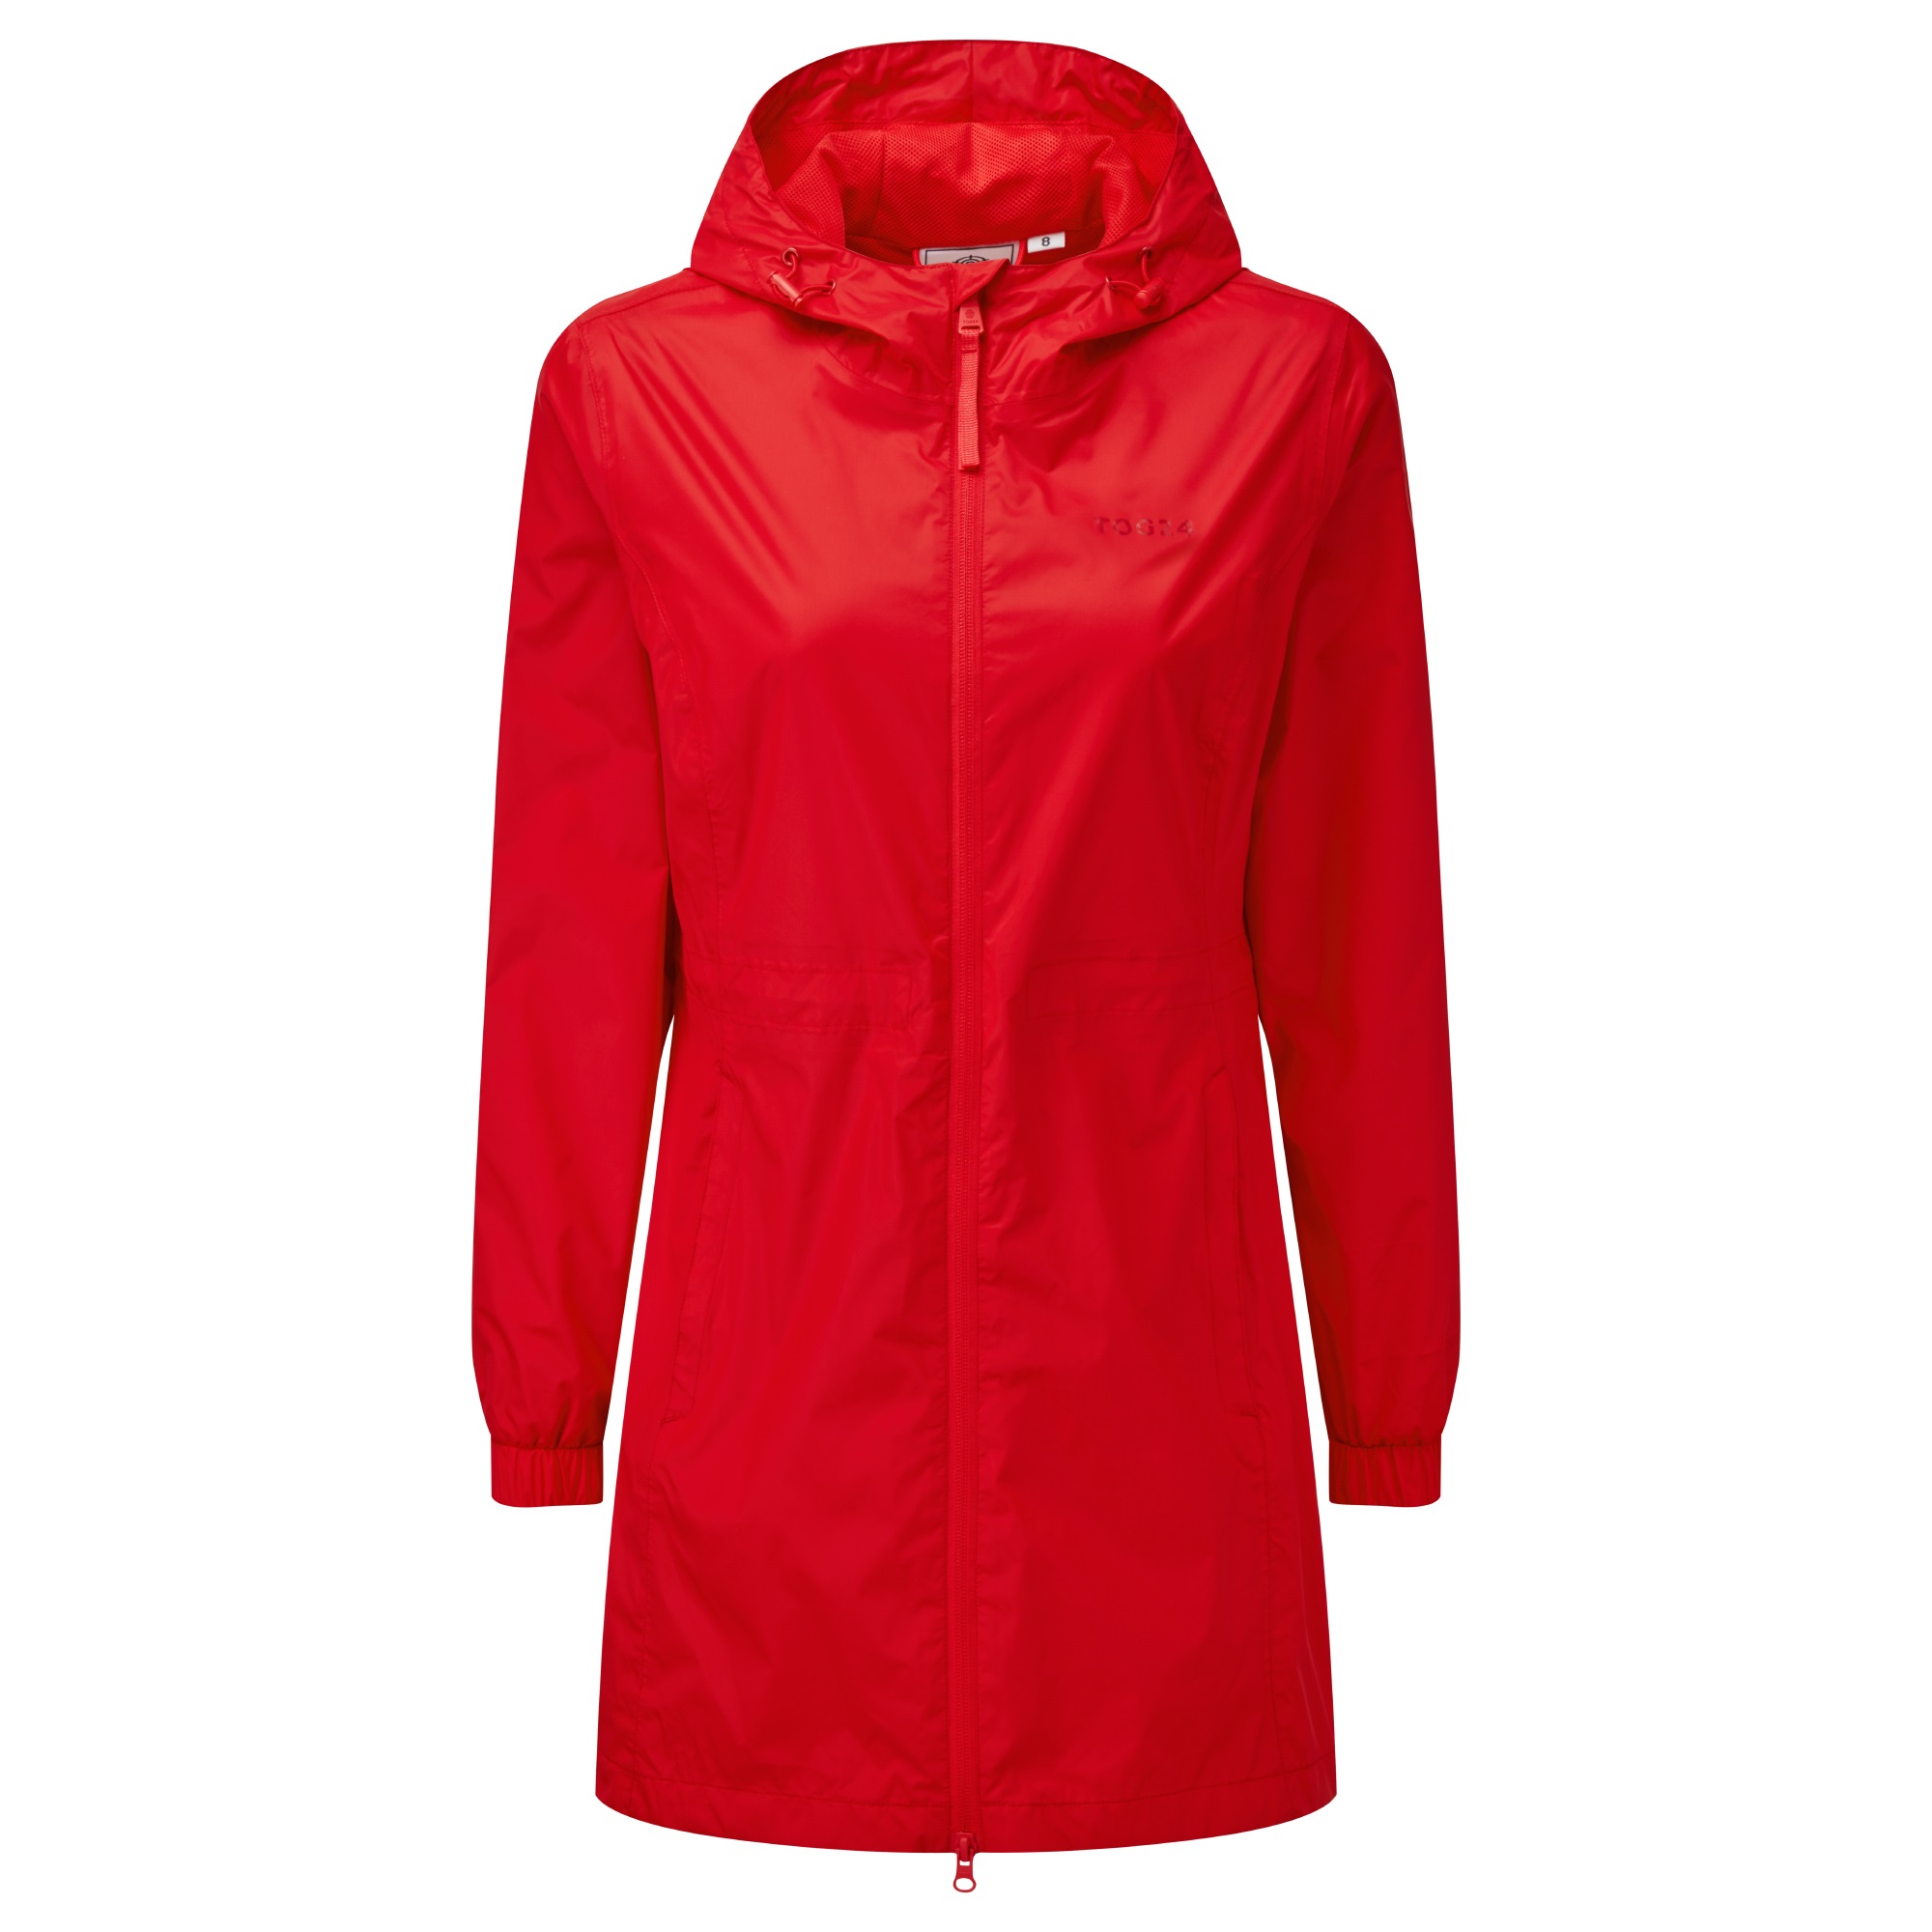 New red waterproof jacket from Tog24